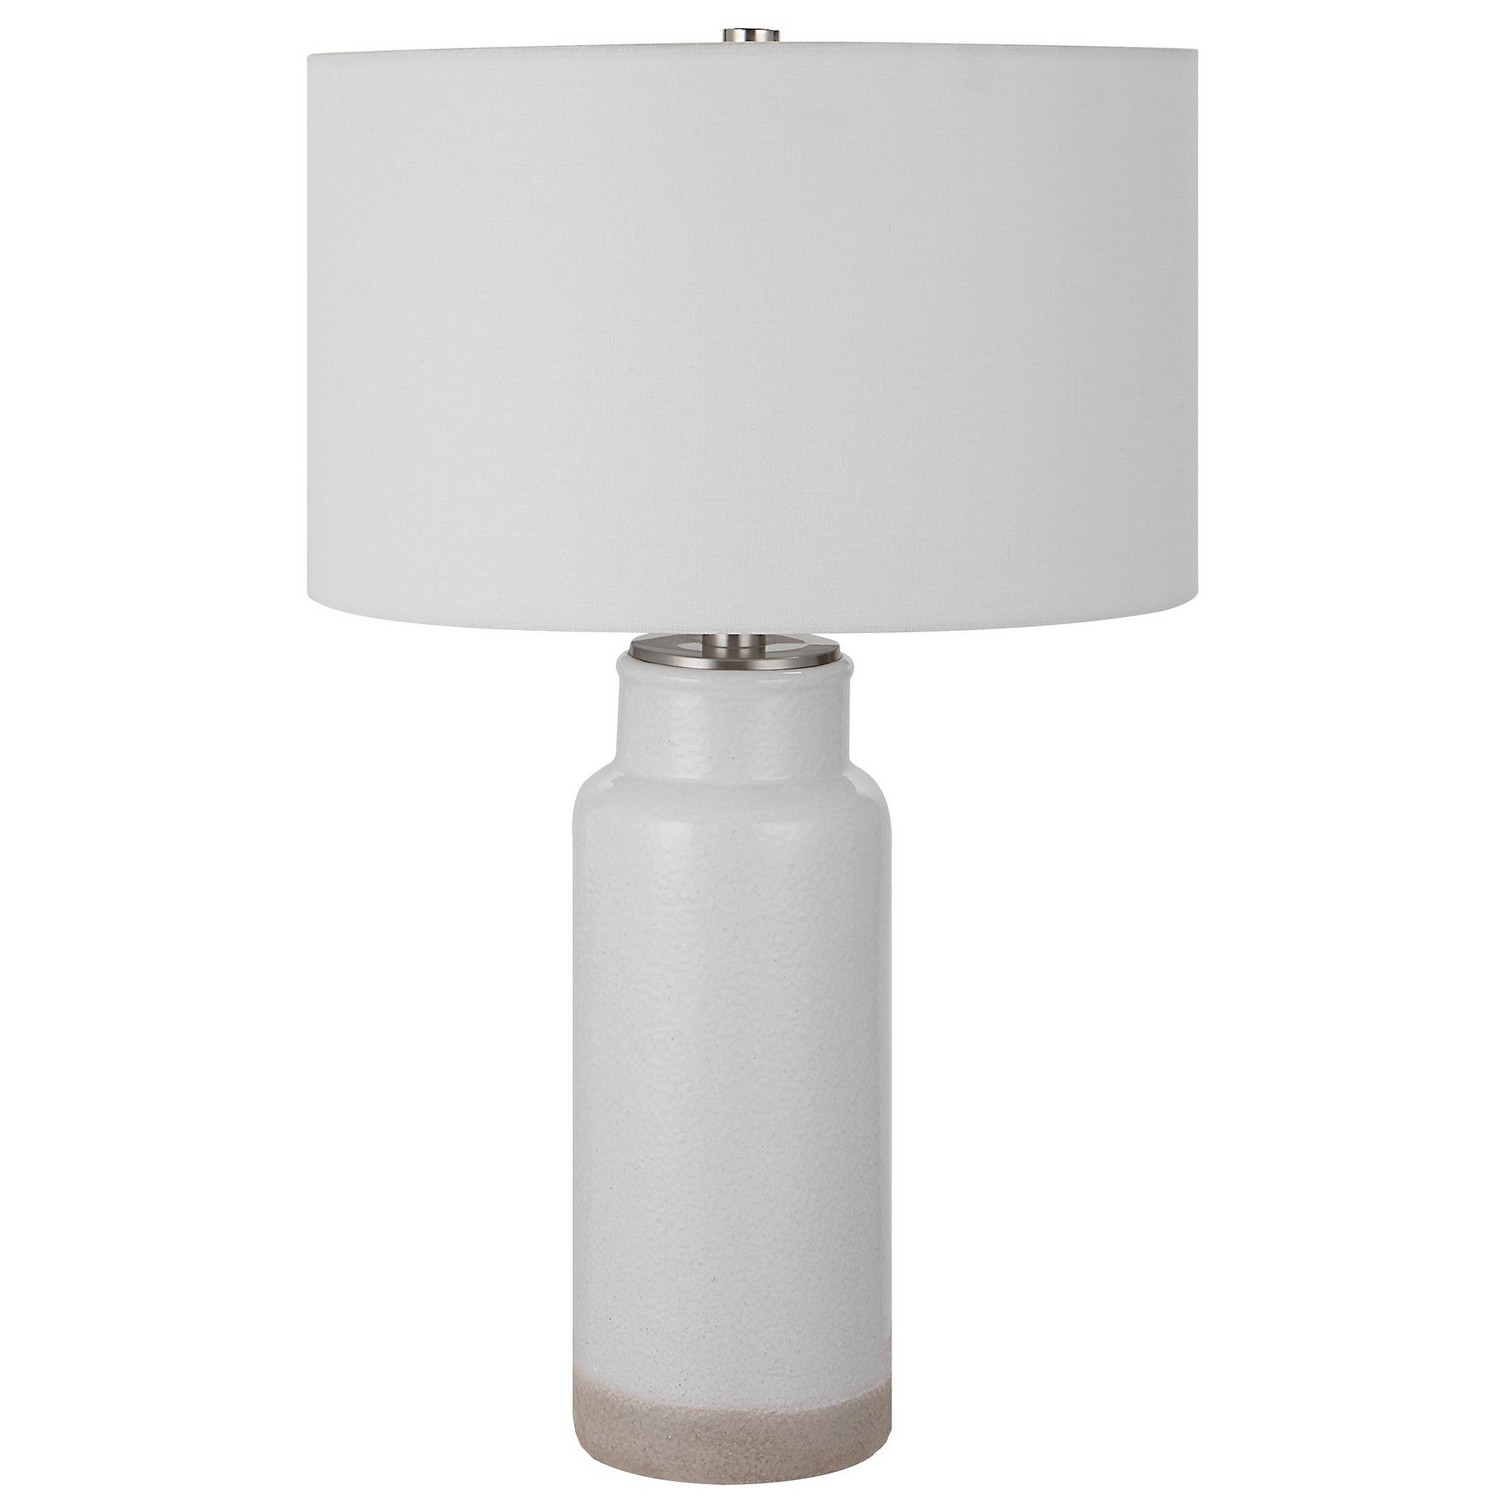 Uttermost Albany Farmhouse Table Lamp - White